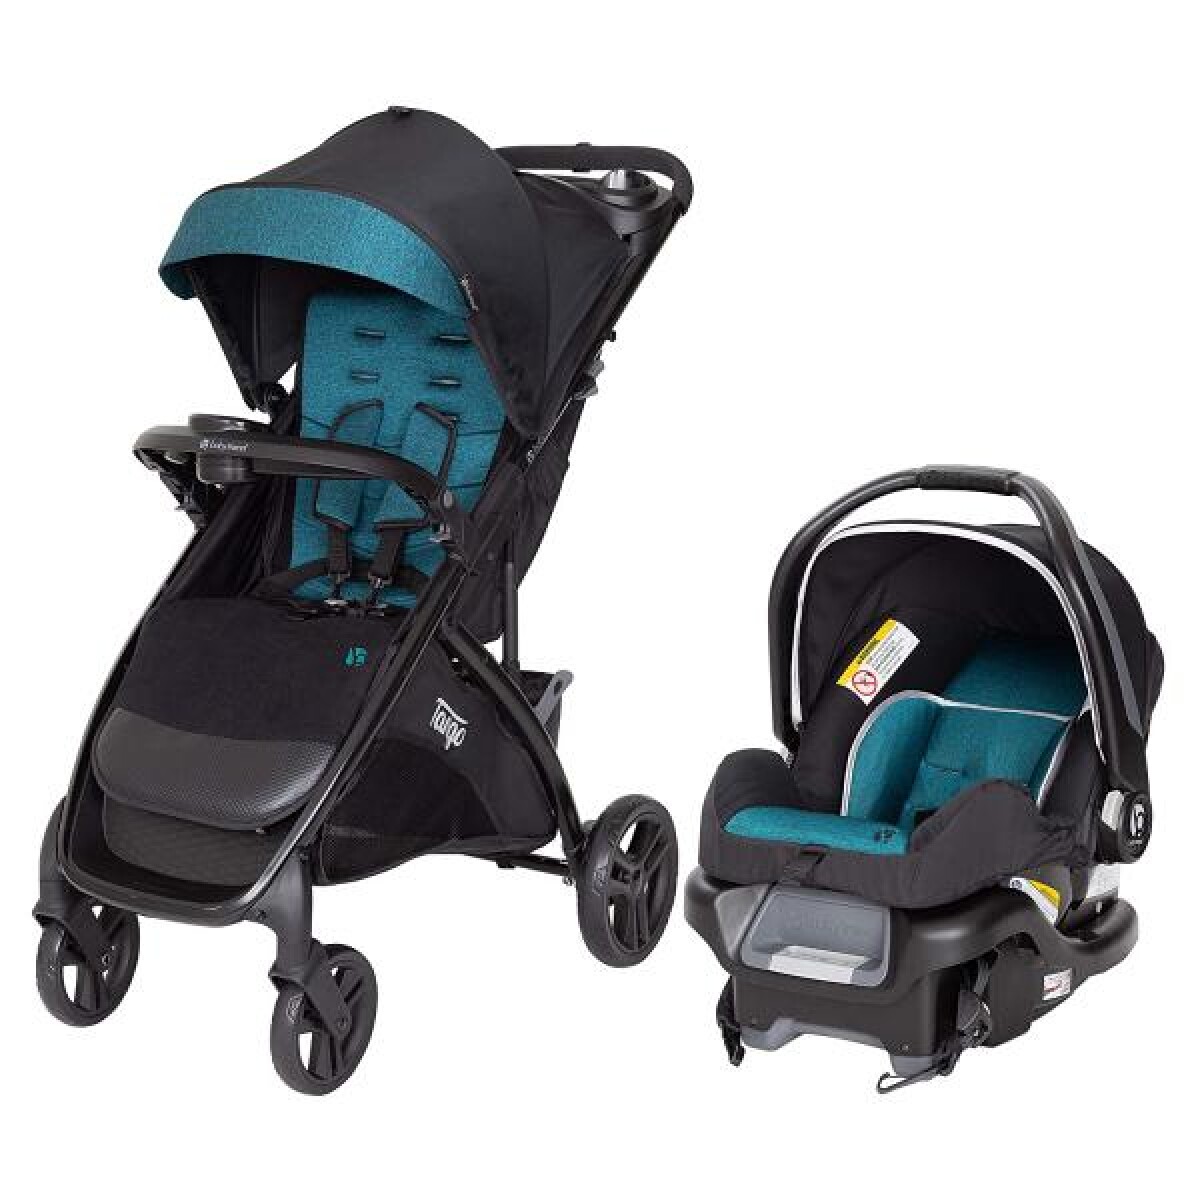 Cochecito Travel system tango - Veridian - Babytrend 